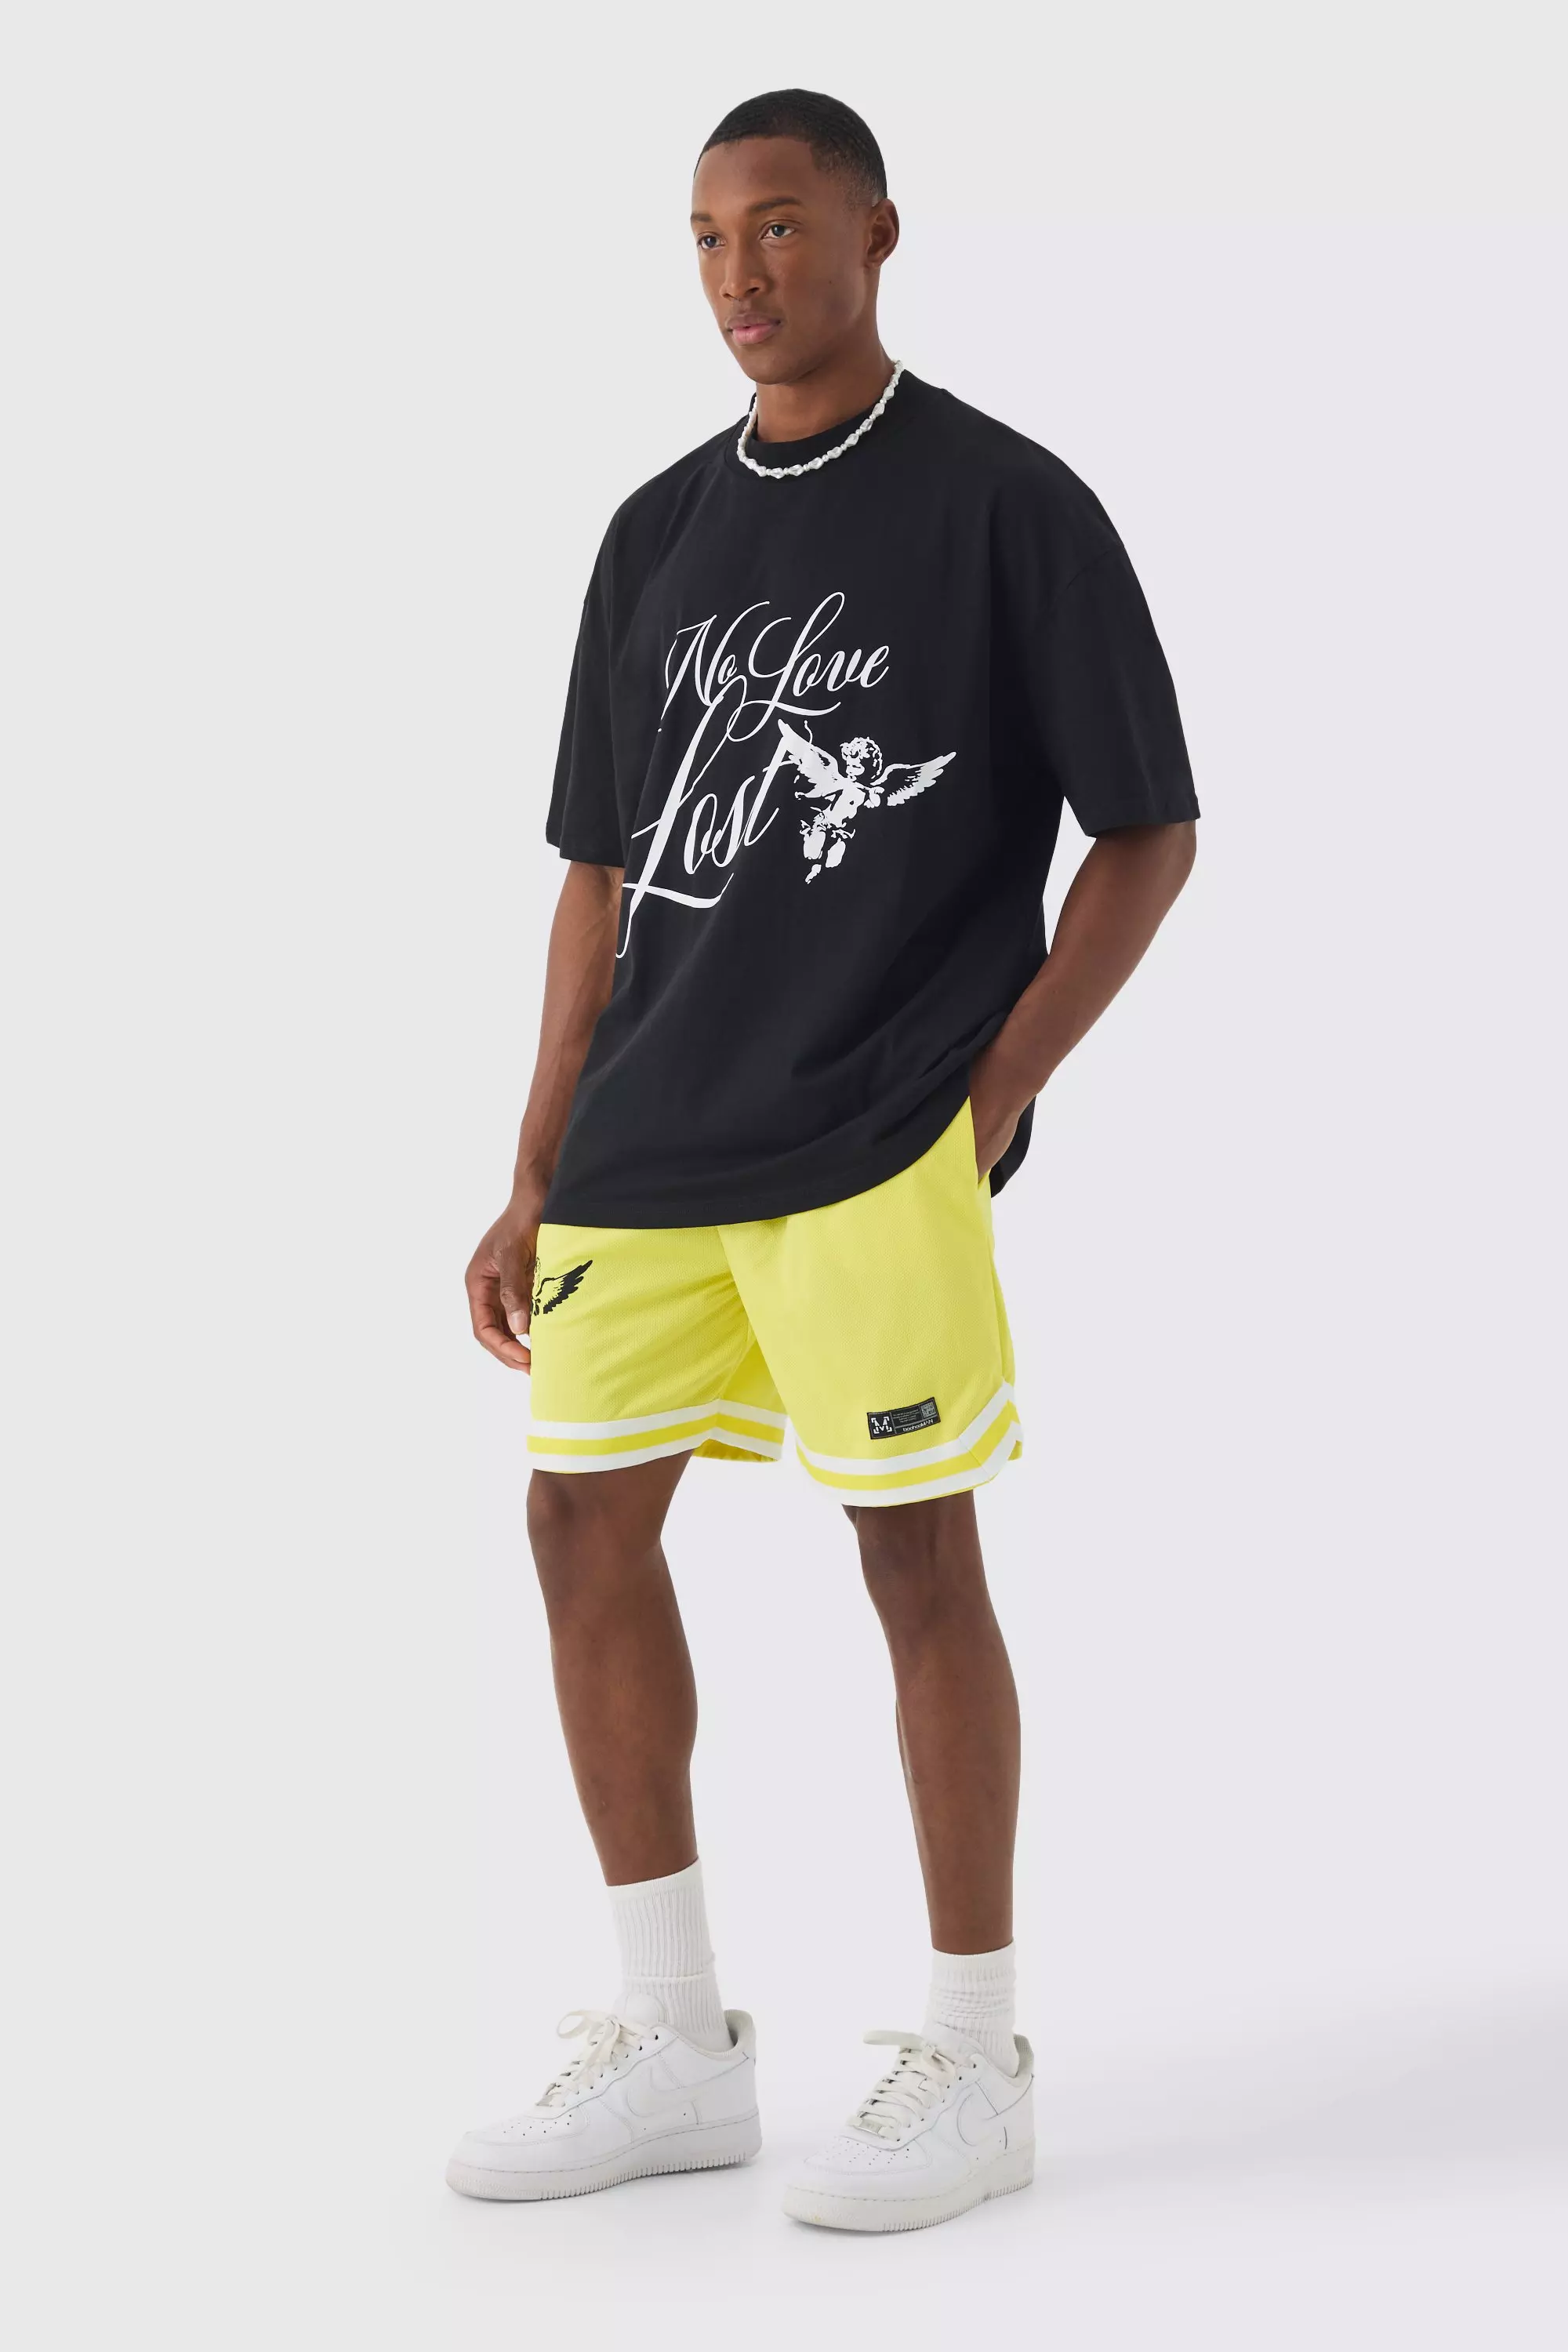 Yellow Oversized Extended Neck No Love T-shirt And Mesh Shorts Set